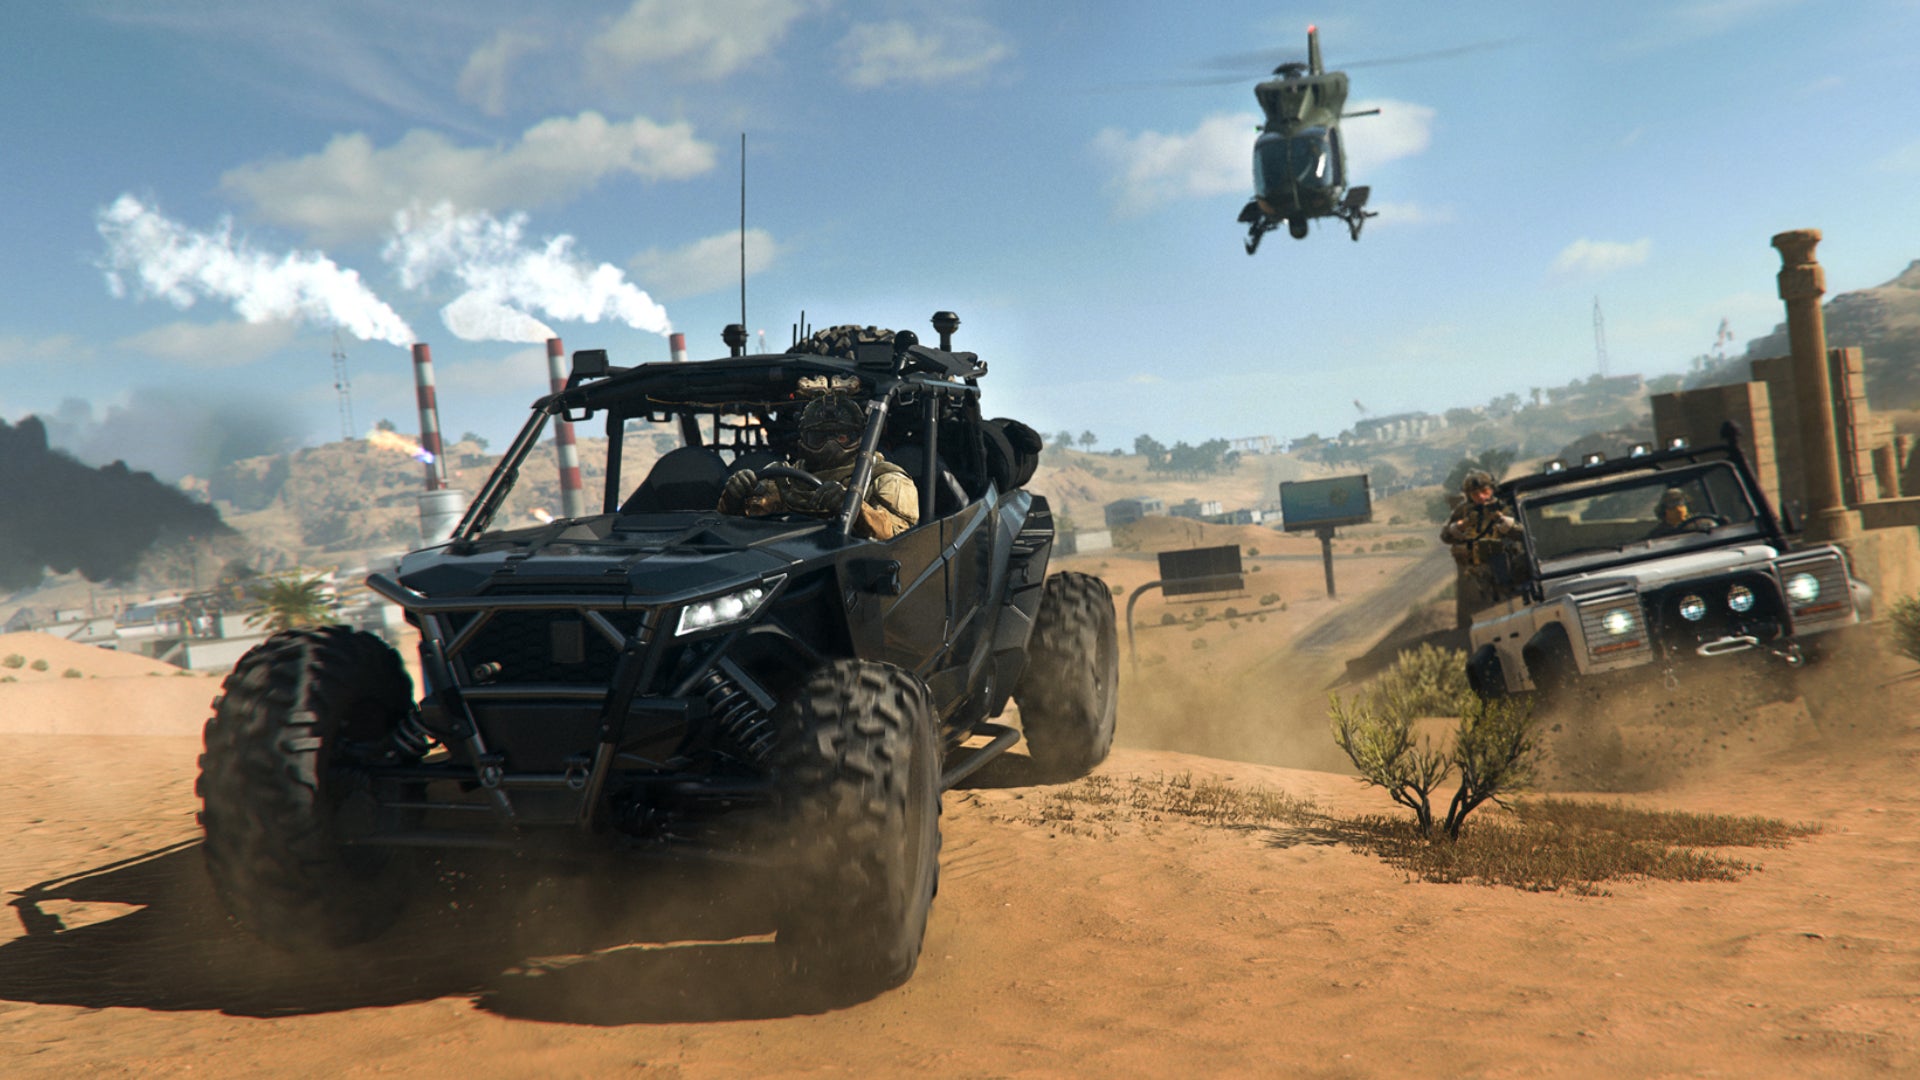 Two land vehicles and a helicopter travel together across a desert landscape in Warzone 2.0.